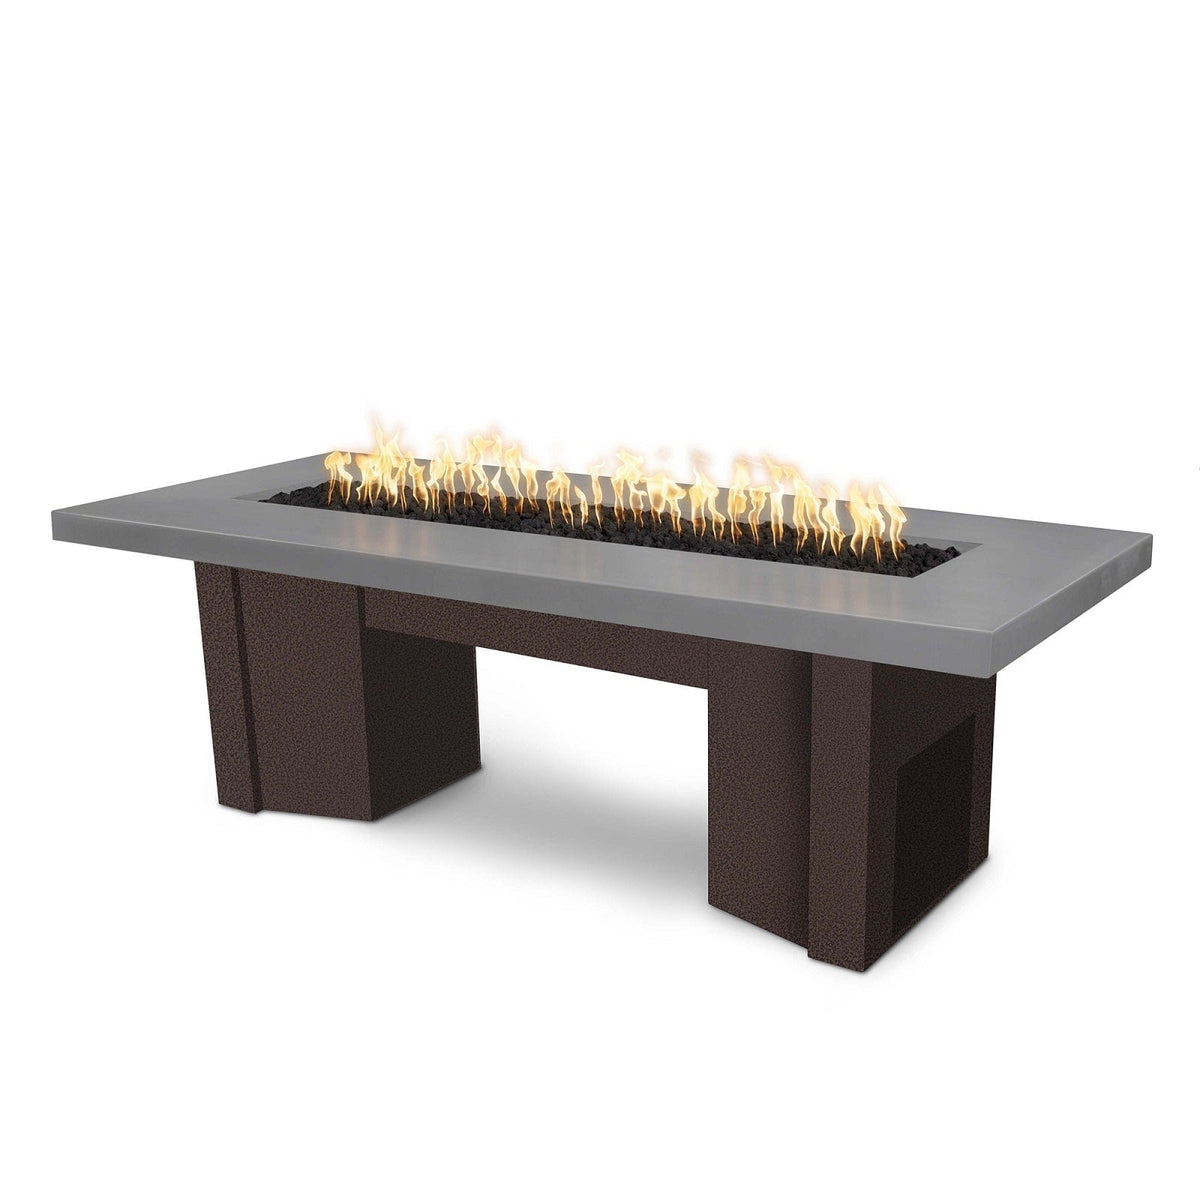 The Outdoor Plus Fire Features Natural Gray (-NGY) / Copper Vein Powder Coated Steel (-CPV) The Outdoor Plus 60&quot; Alameda Fire Table Smooth Concrete in Liquid Propane - Match Lit / OPT-ALMGFRC60-LP